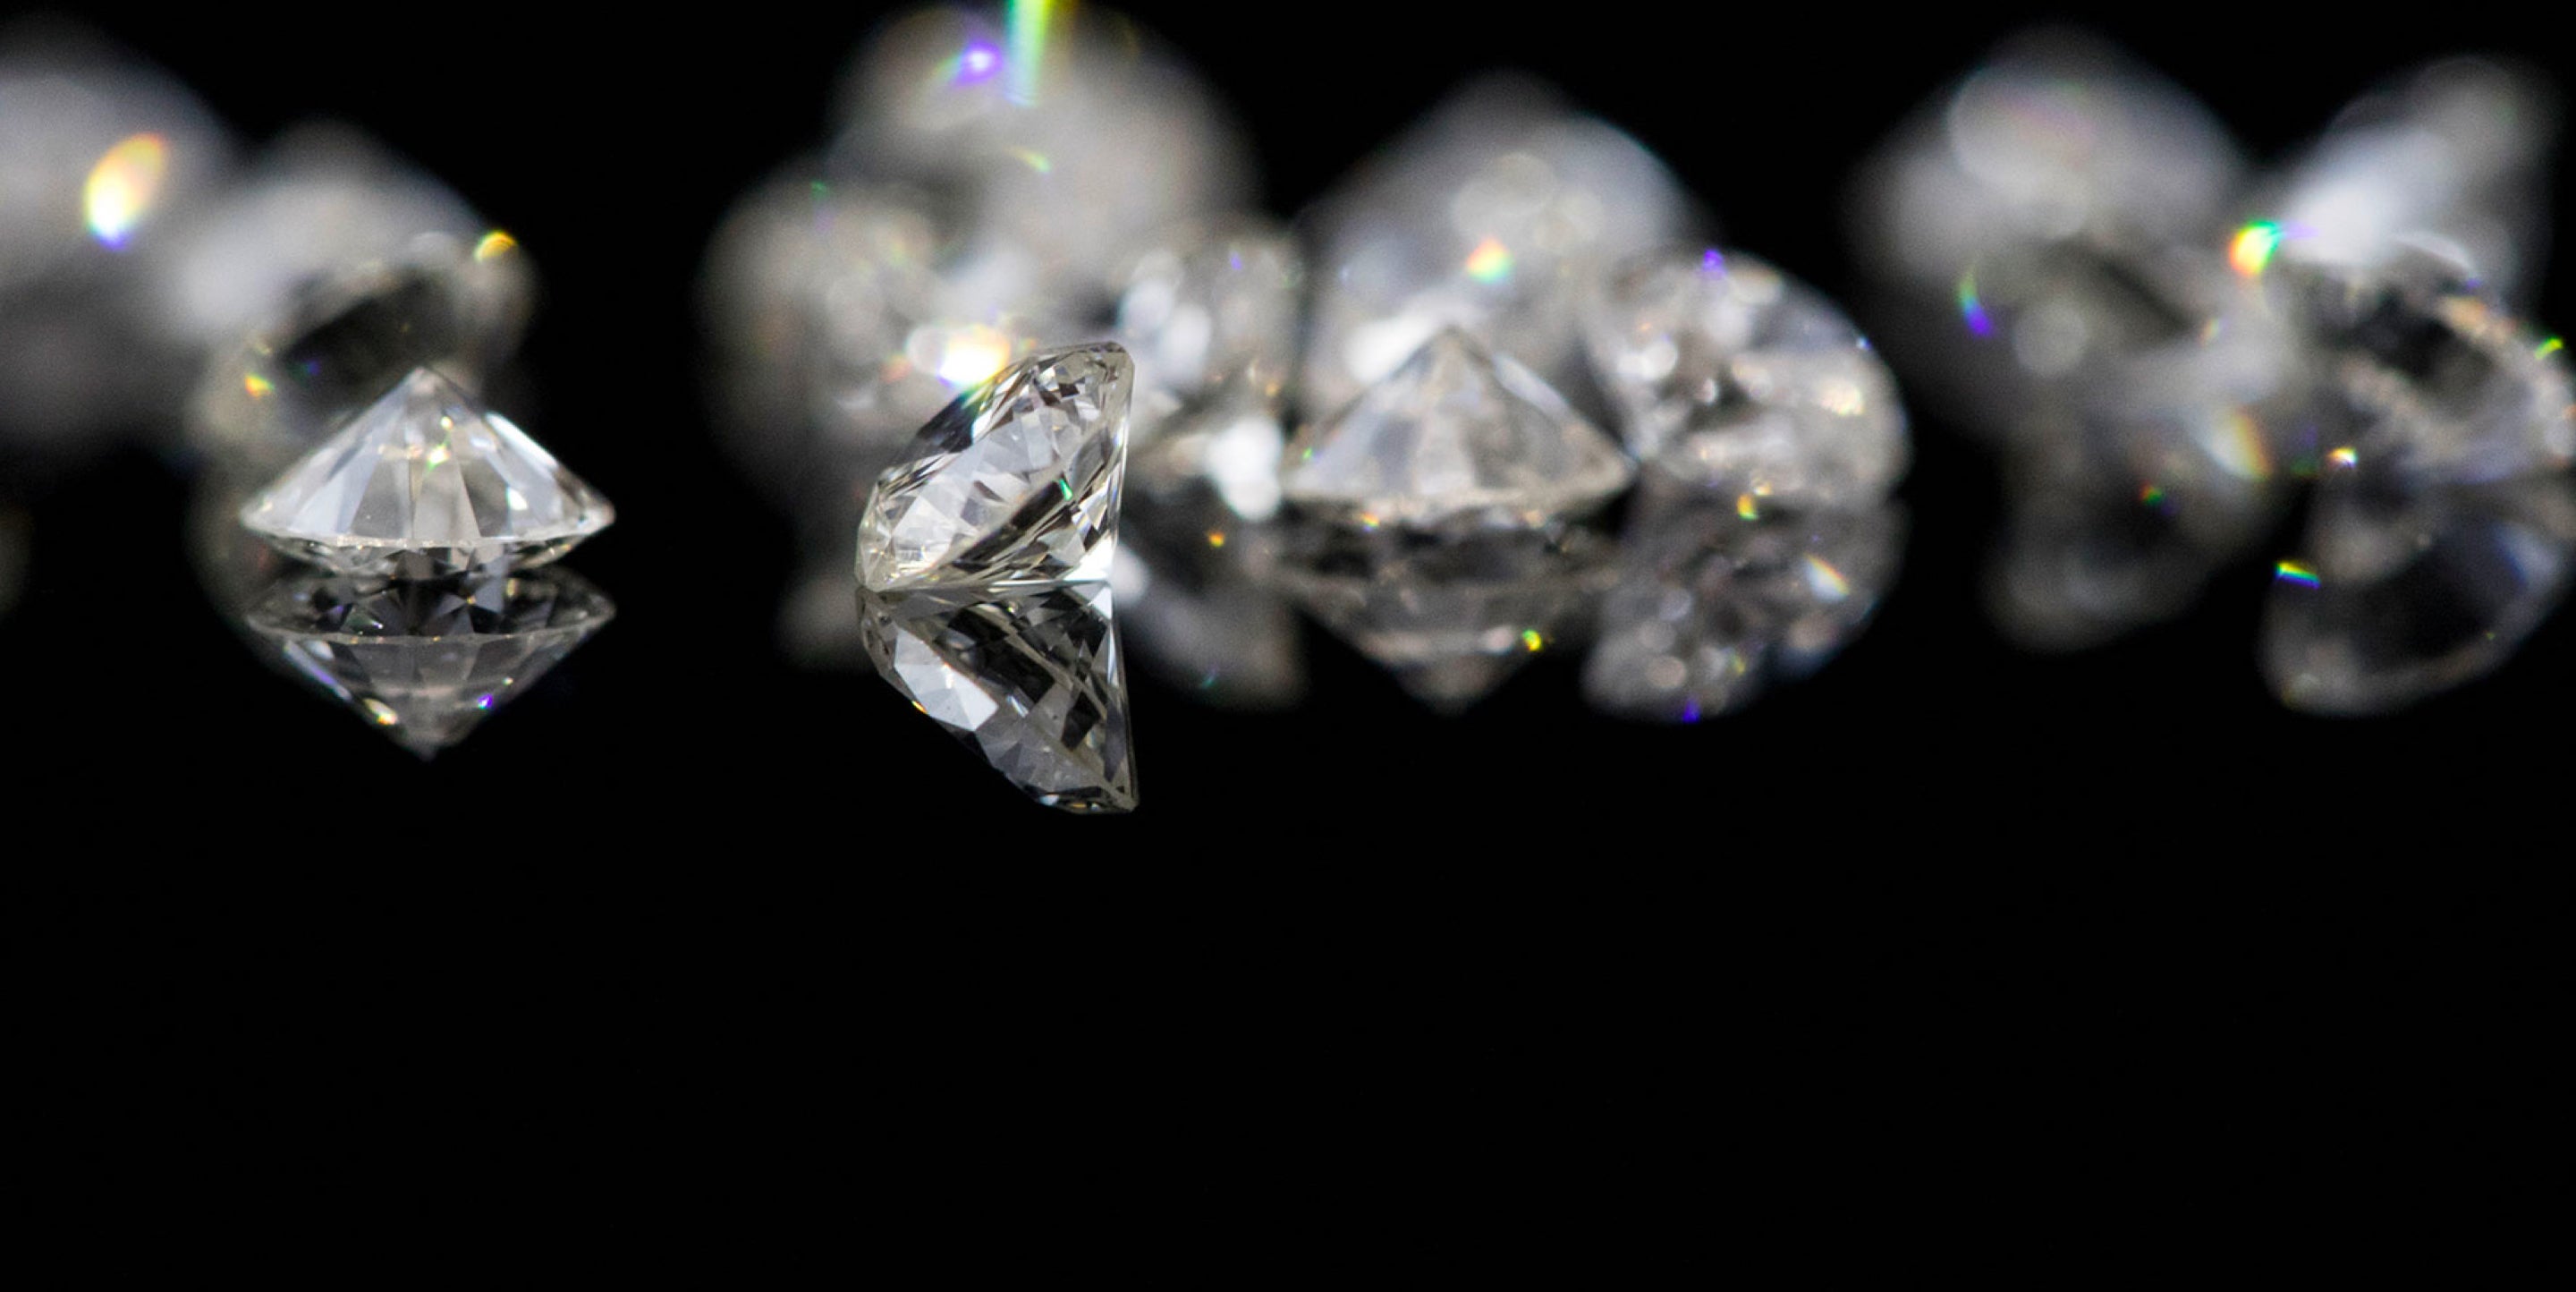 DE BEERS GROUP LAUNCHES DIAMOND EDUCATION COURSE PARTNERSHIP WITH